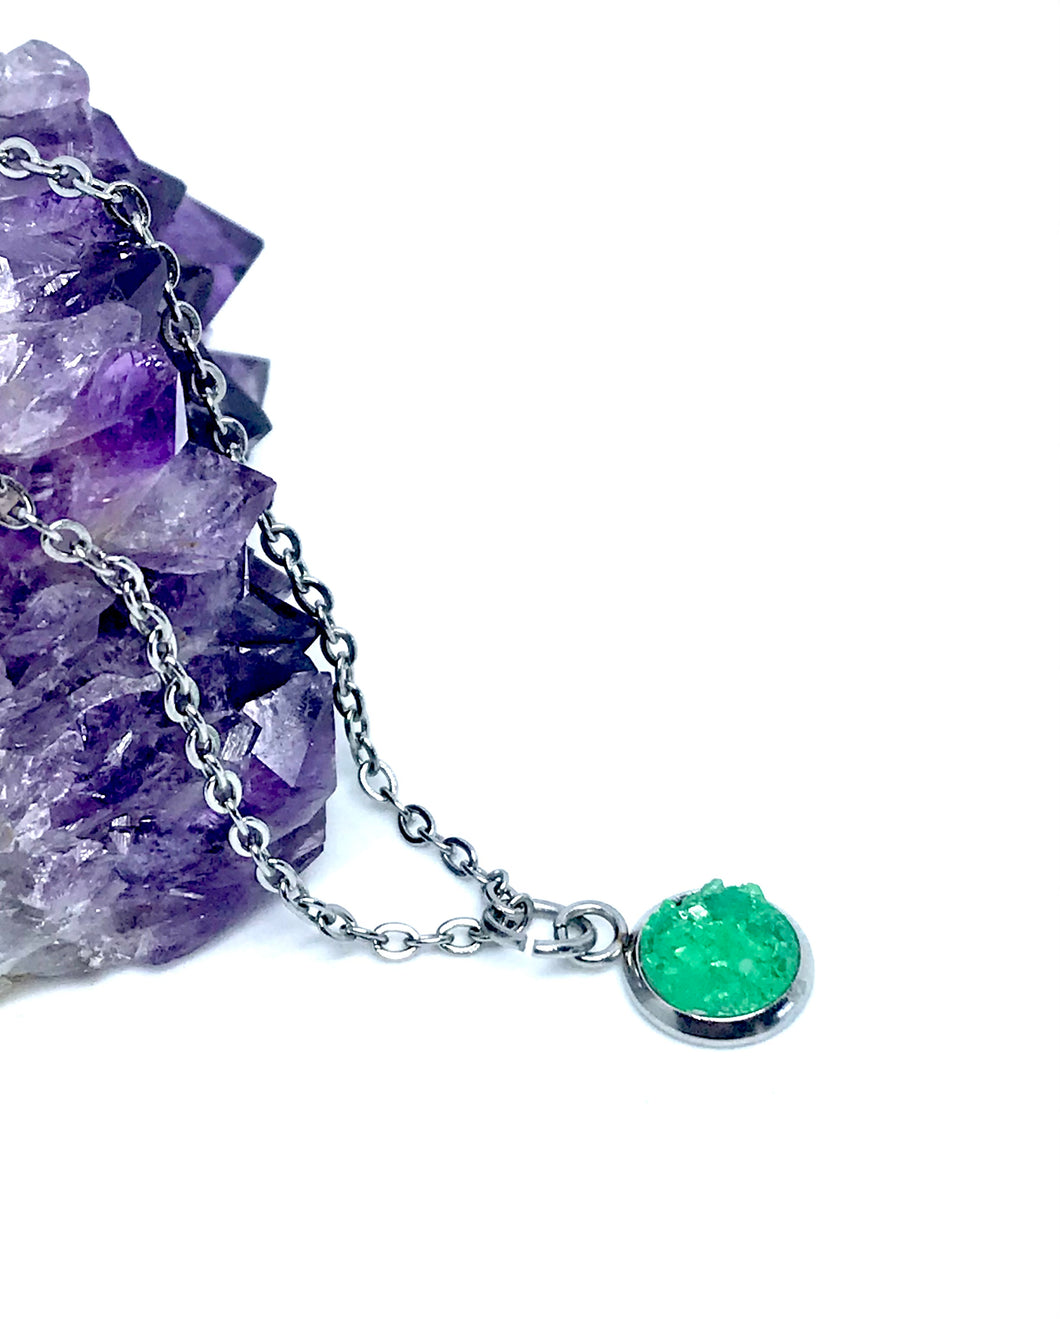 8mm Jade Green Druzy Necklace (Stainless Steel)